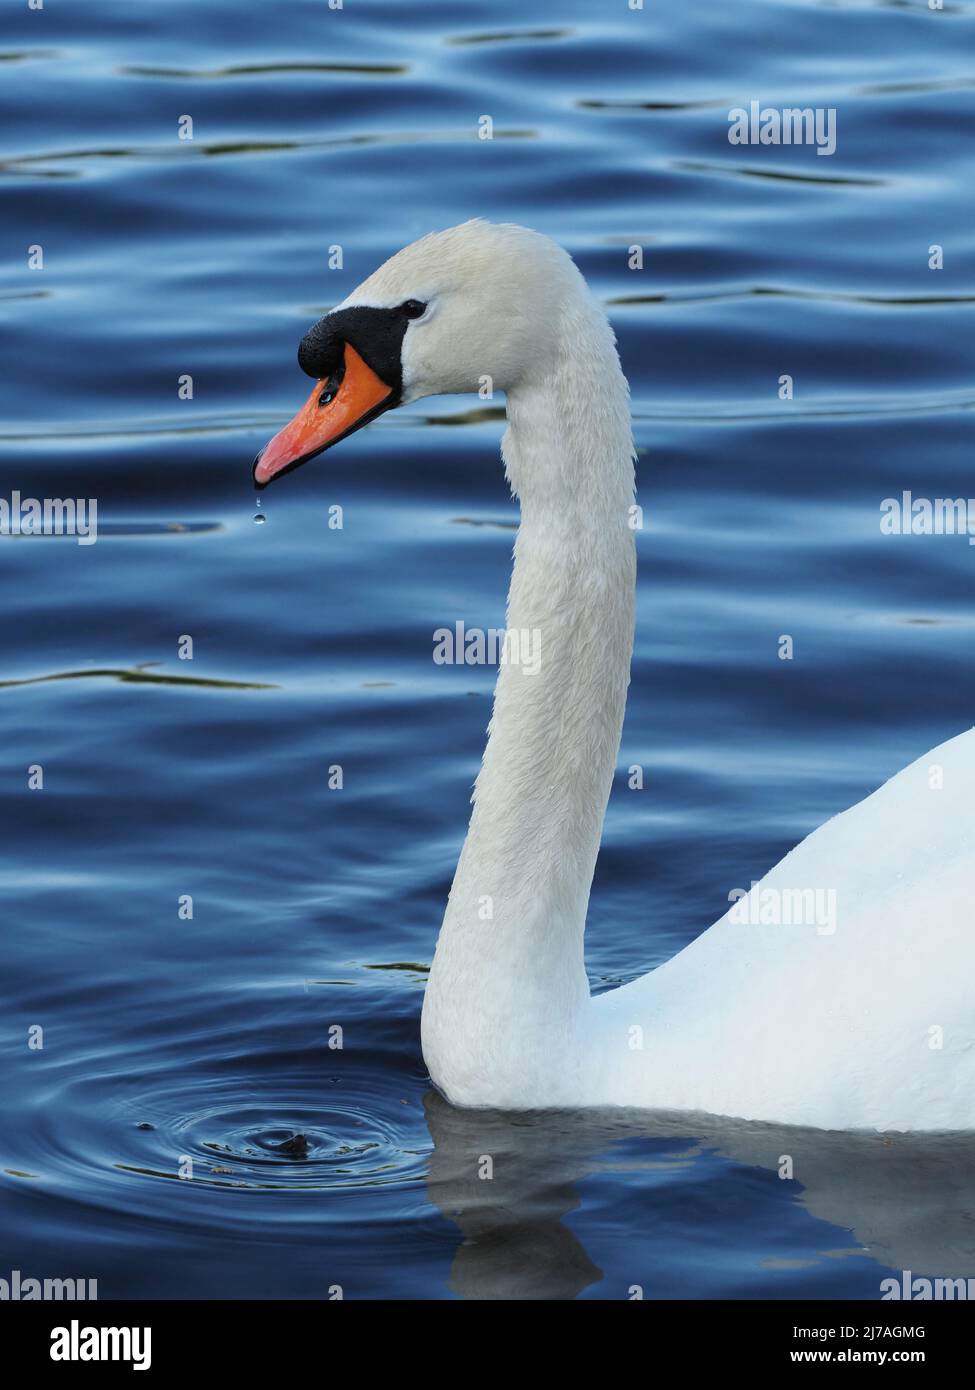 A Cob Mute Swan, Cygnus Olor, a portrait close up. White feathers & orange bill contrasting against the dark blue rippled water of the River Nairn. Stock Photo